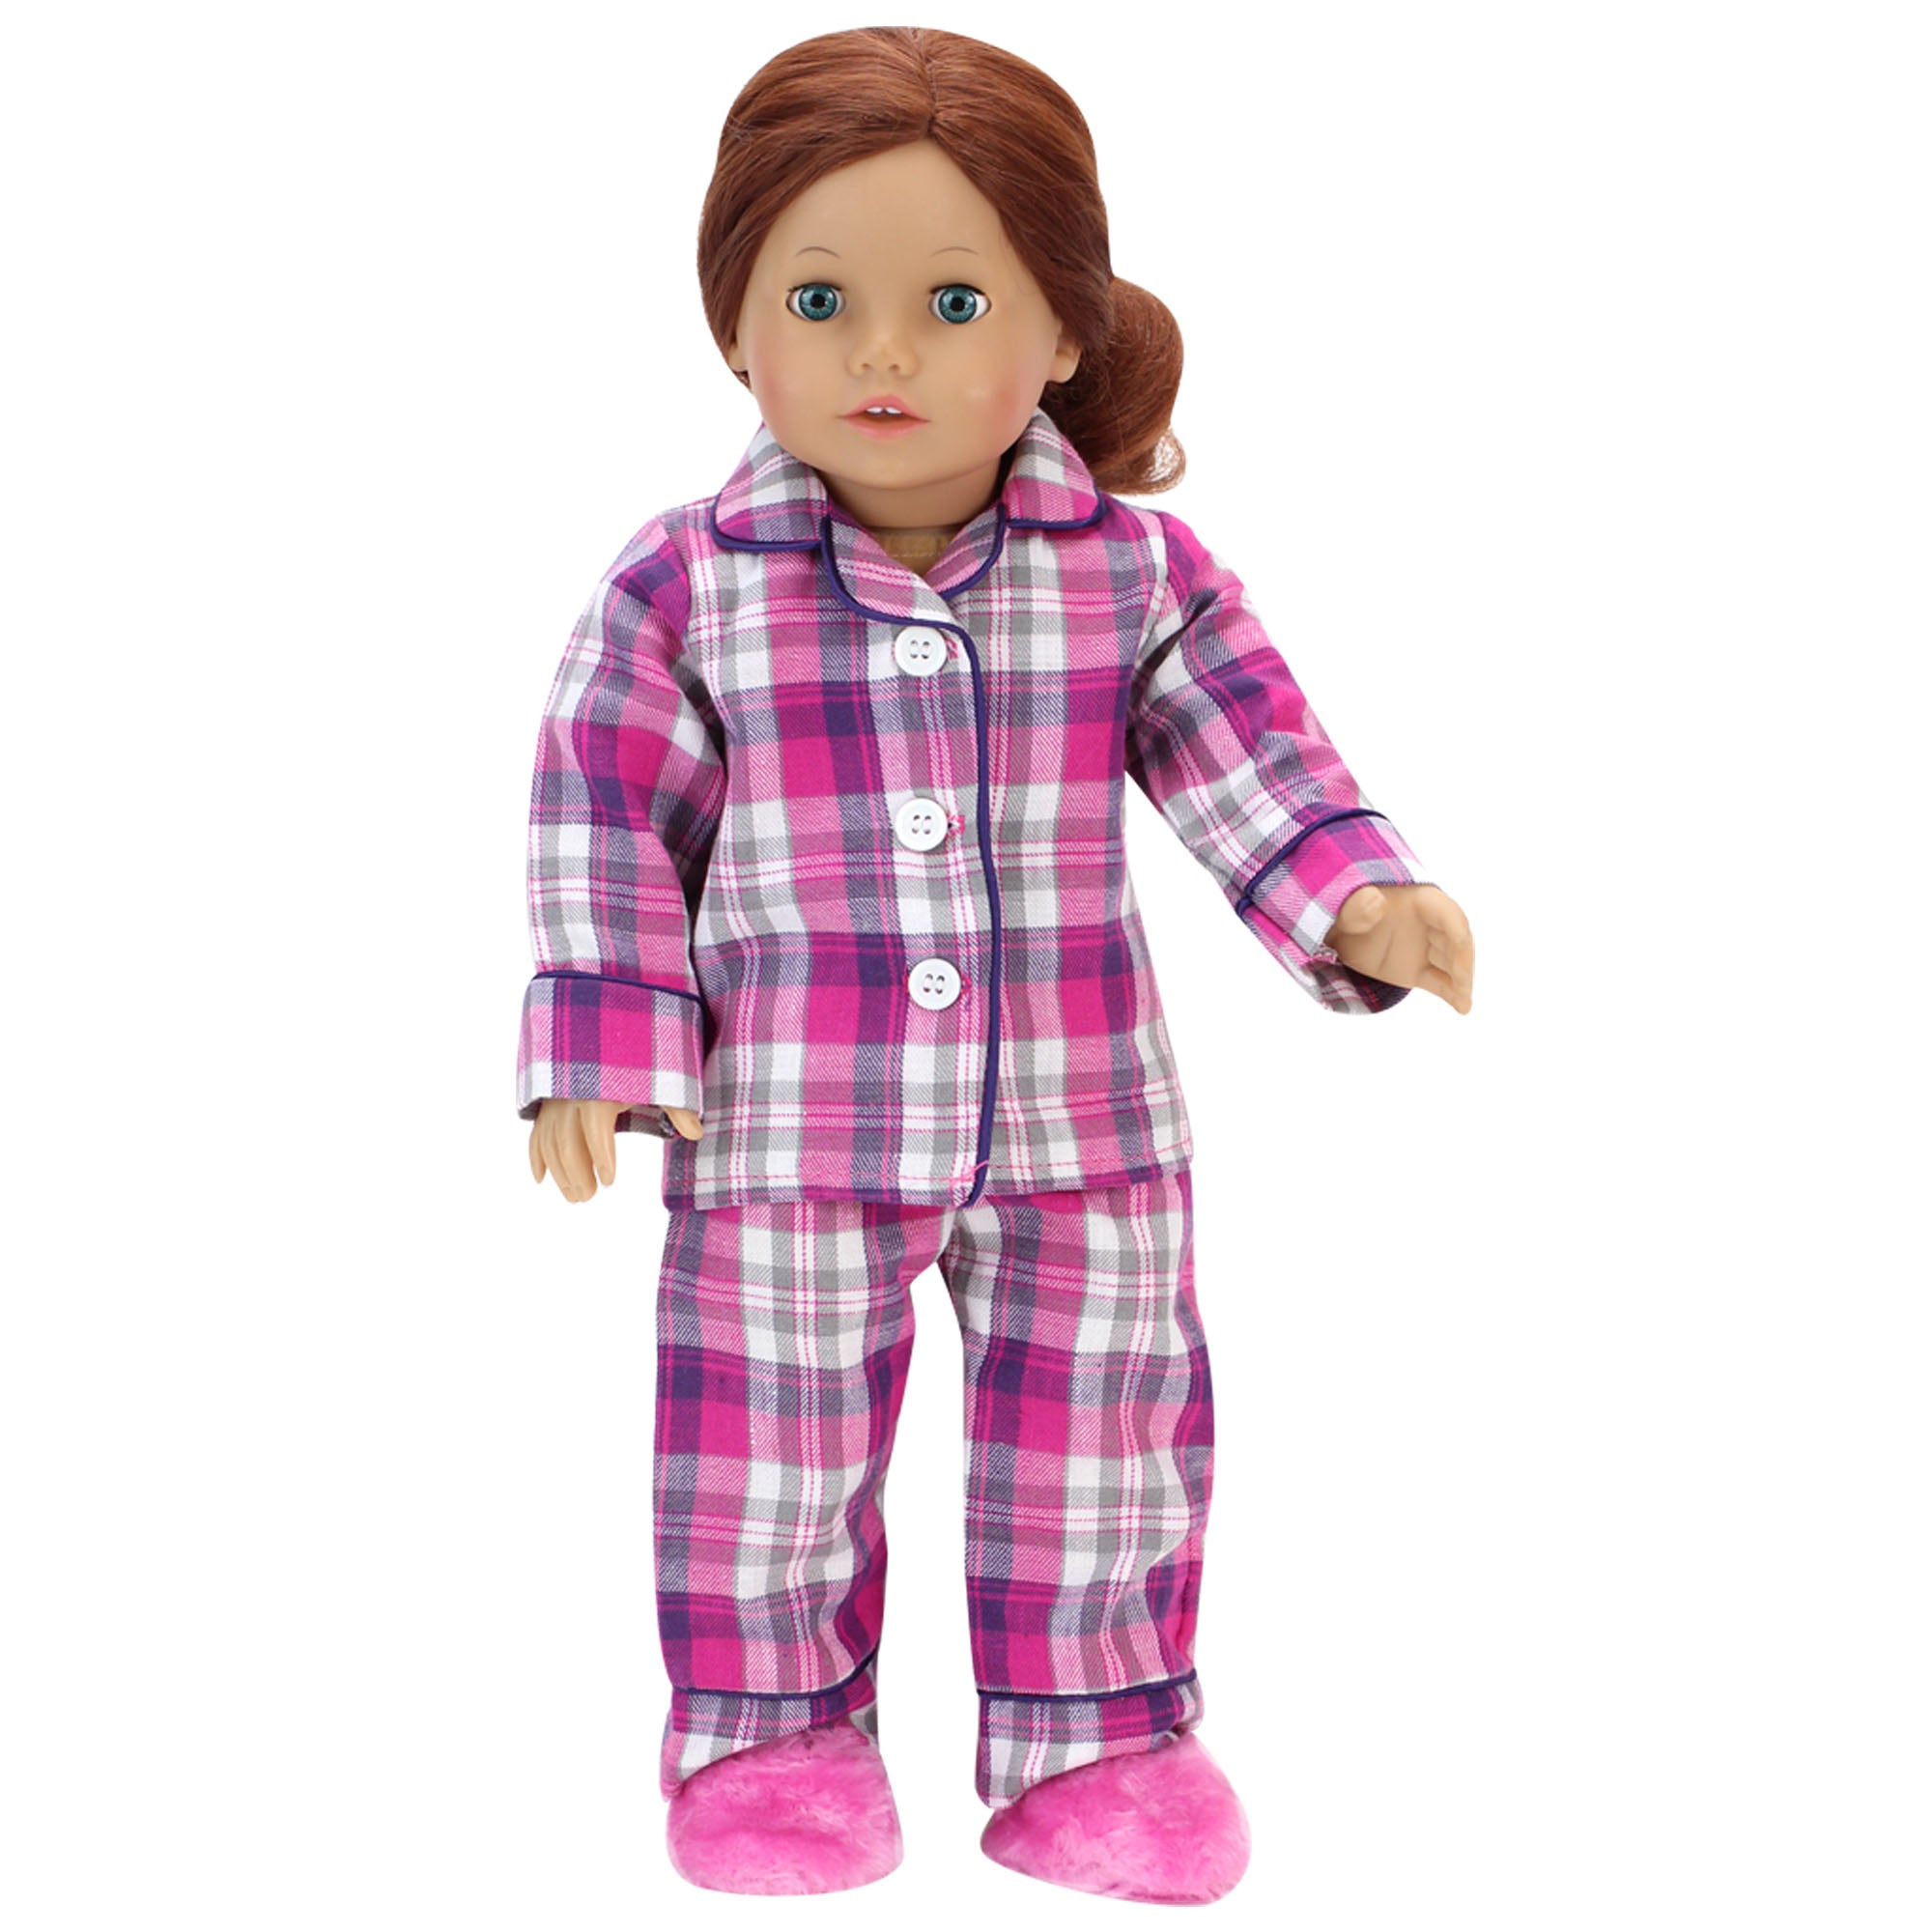 Sophia's Flannel Pajama & Slippers Set for 18'' Dolls, Pink